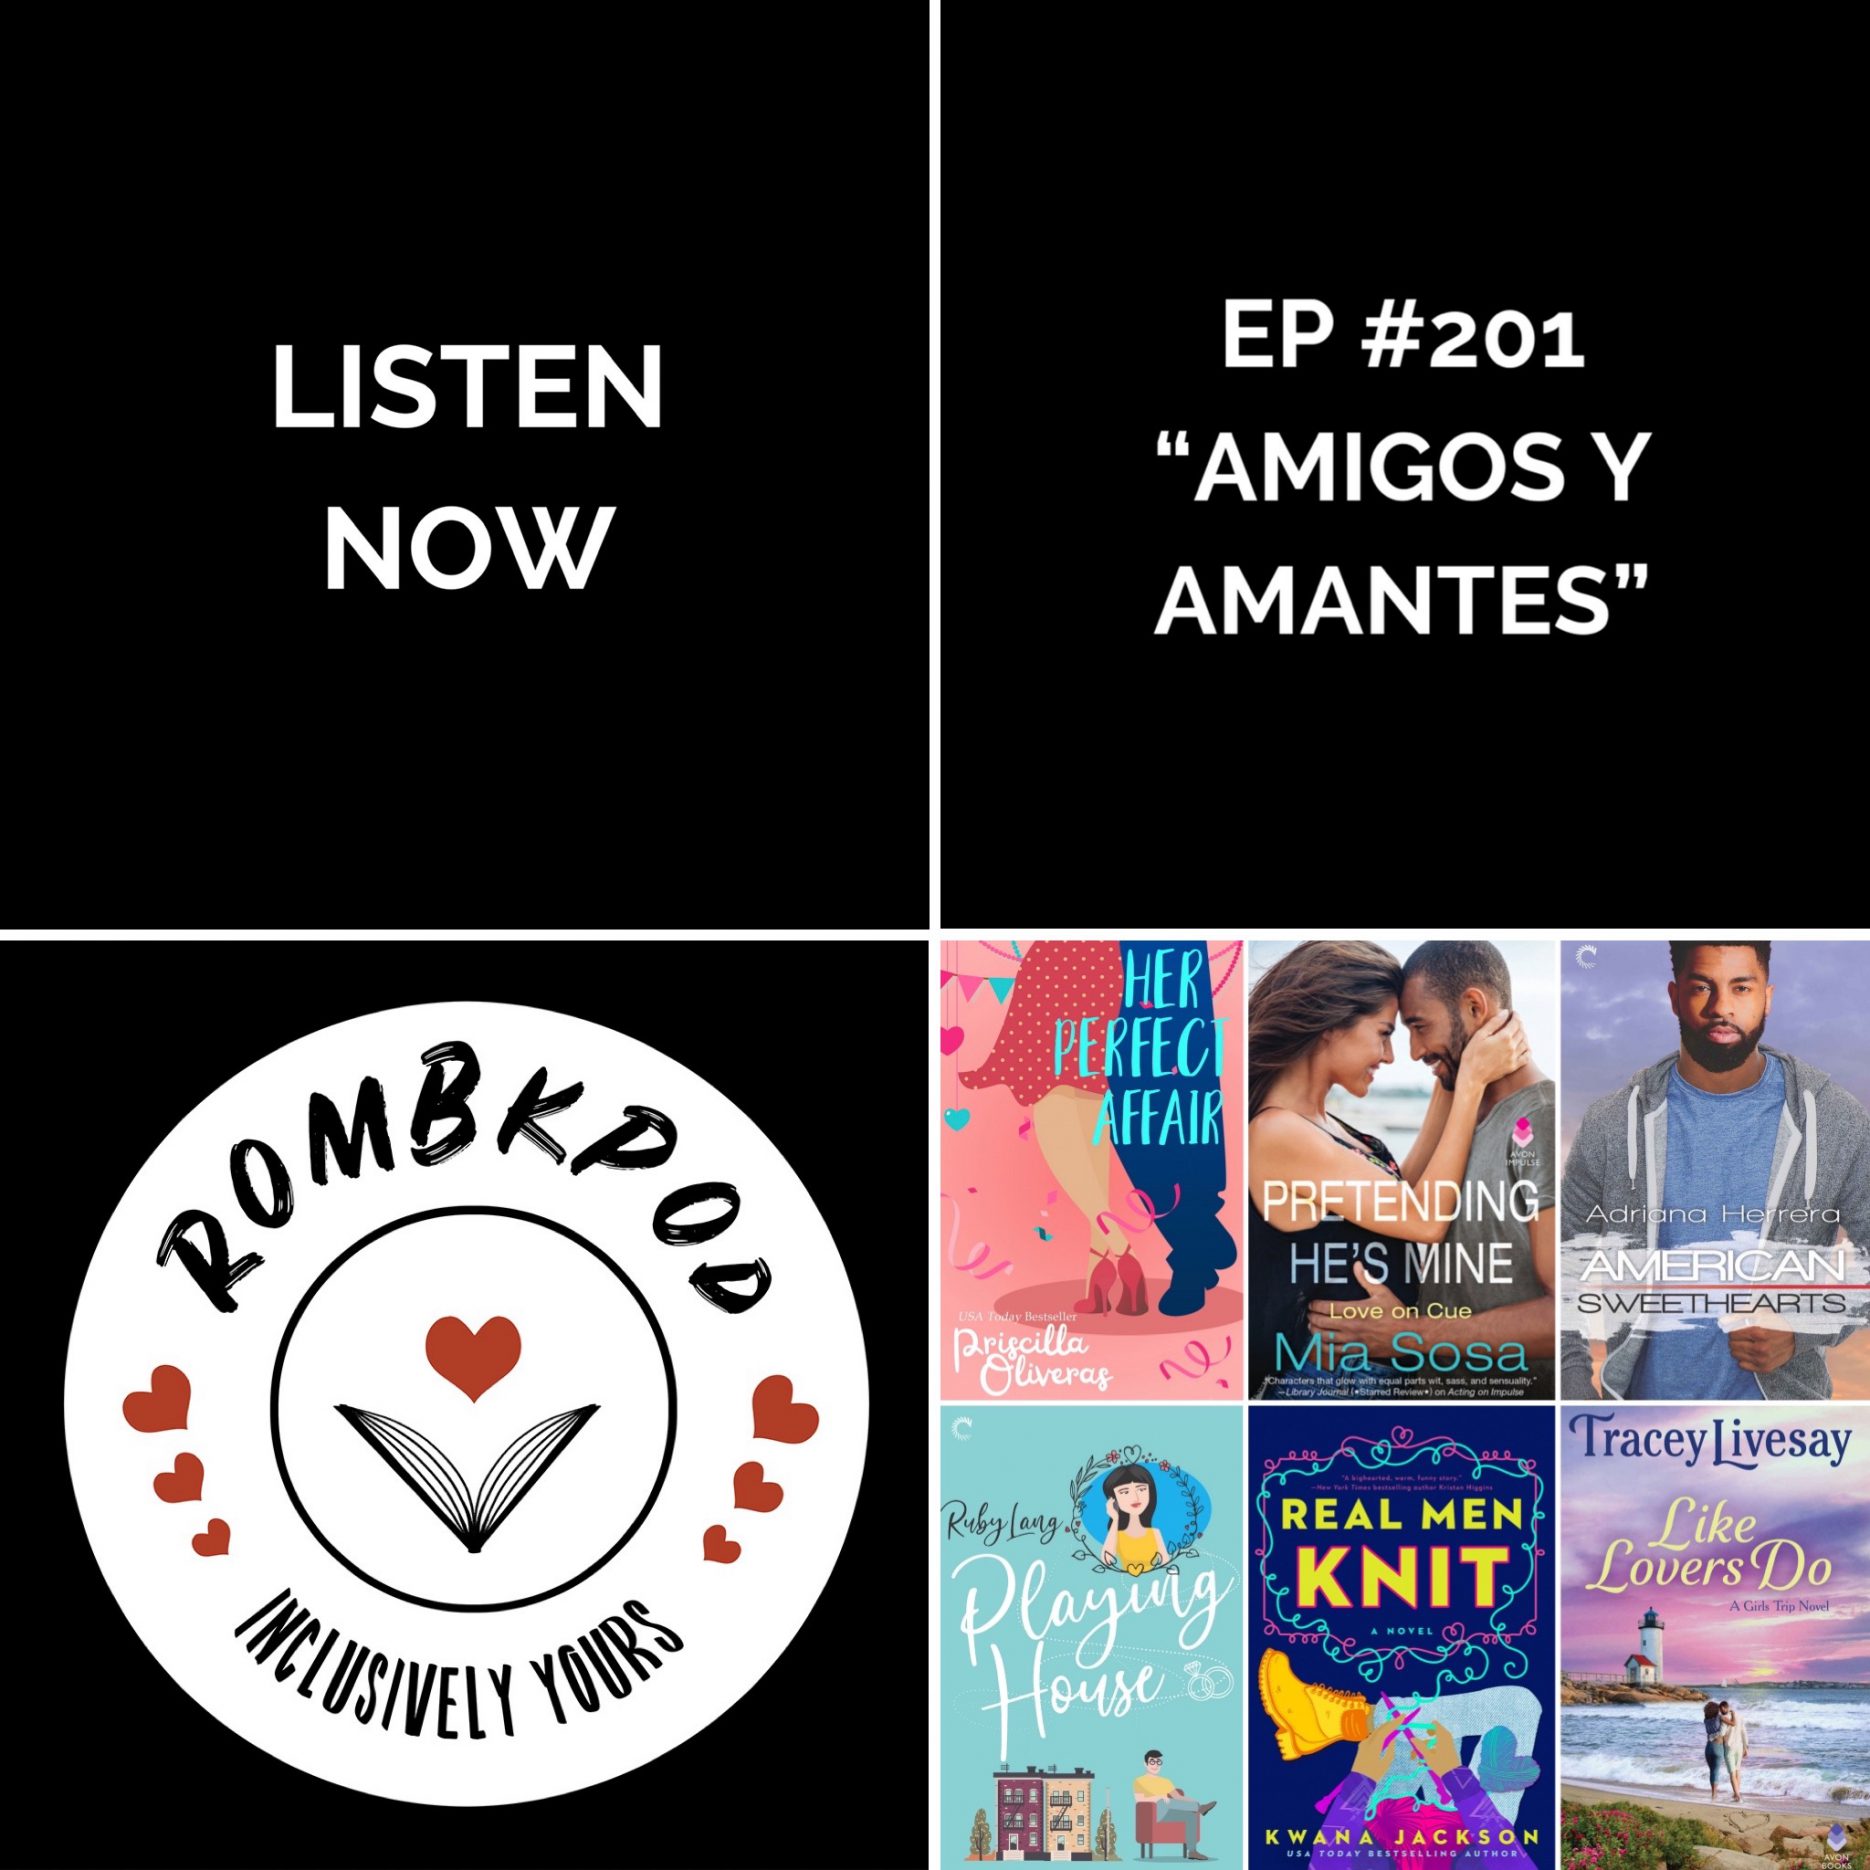 IMAGE: lower left corner, RomBkPod heart logo; lower right corner, ep #201 cover collage; IMAGE TEXT: Listen Now, ep #201 "Amigos y Amantes"